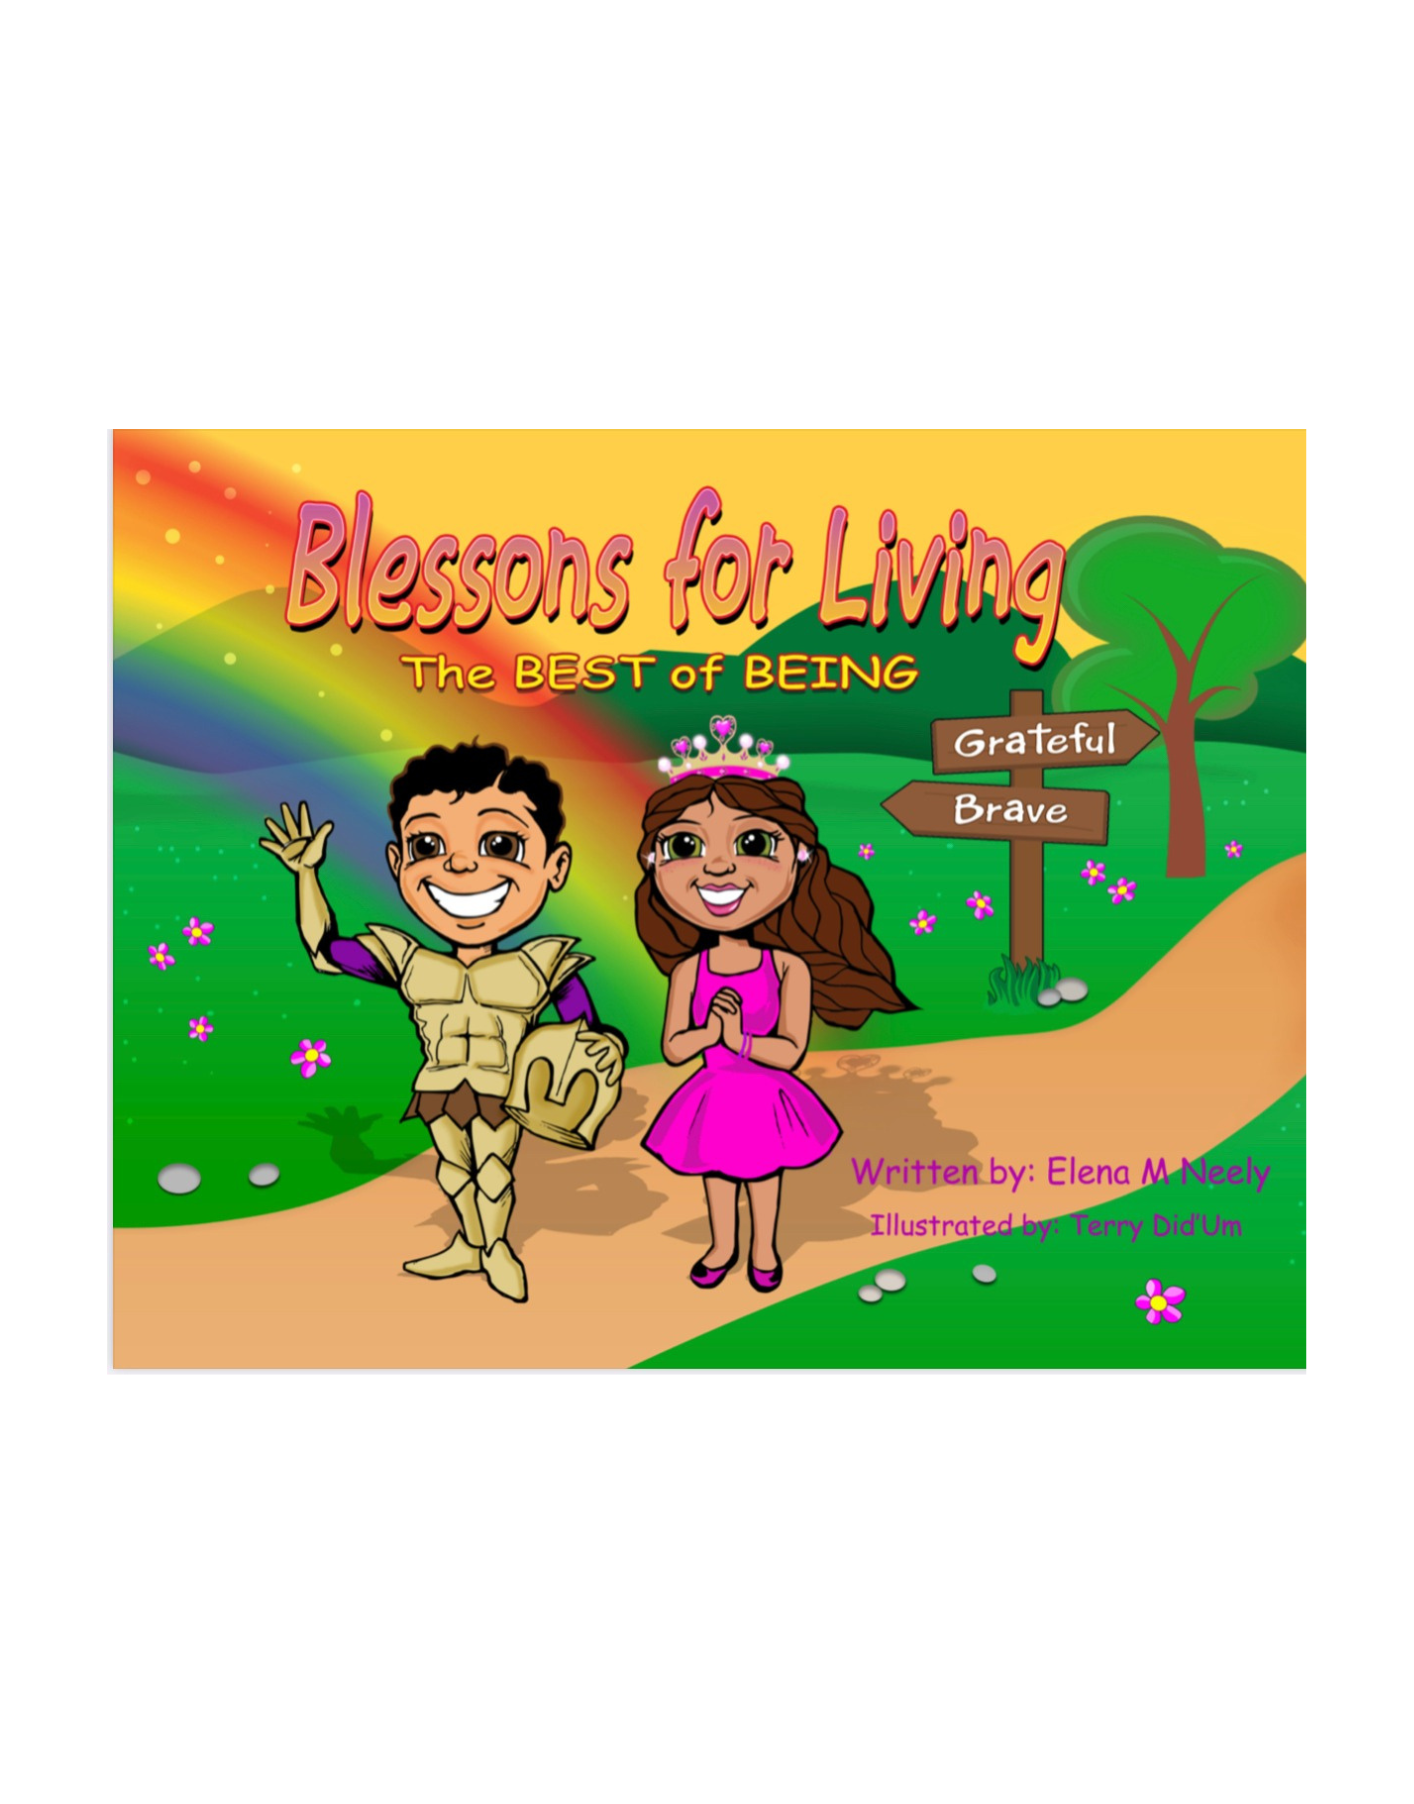 Blessons for Living: The Best of Being